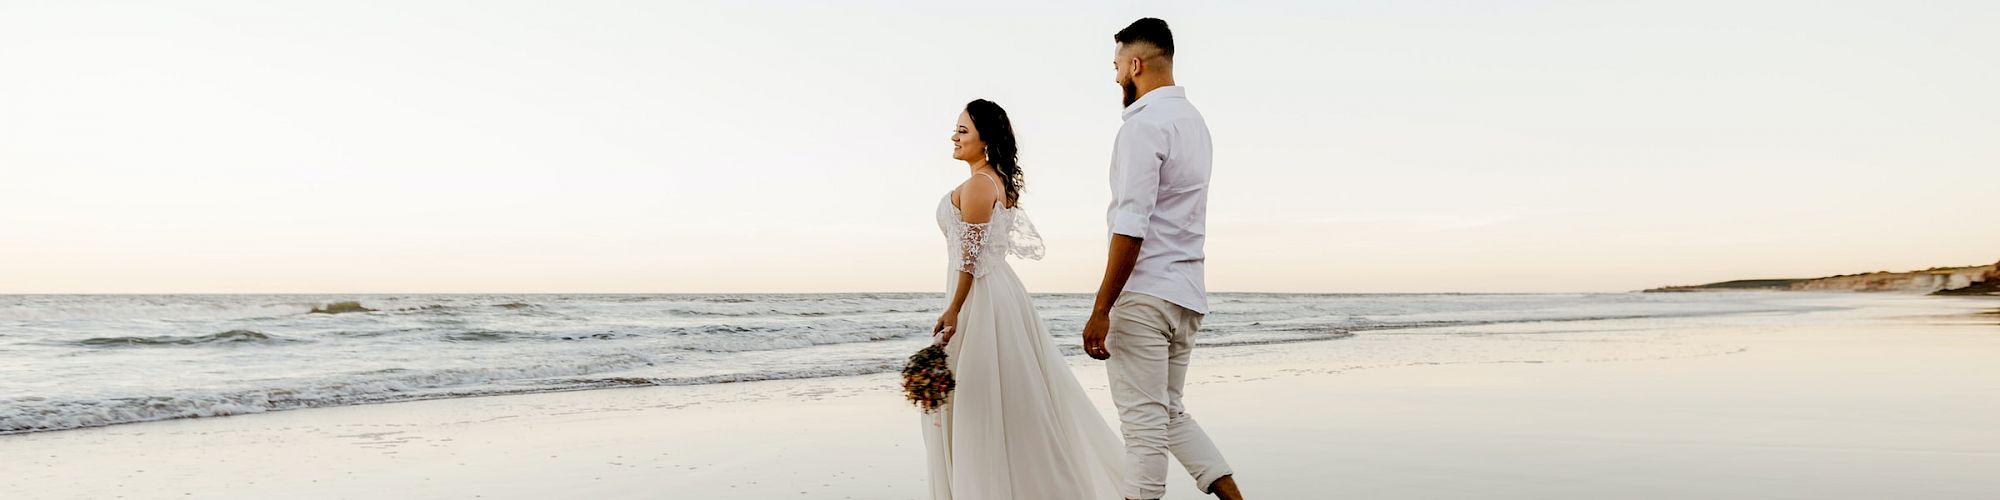 A couple is walking barefoot on a beach near the water’s edge during sunset, with the woman in a white dress and the man in light-colored clothing.